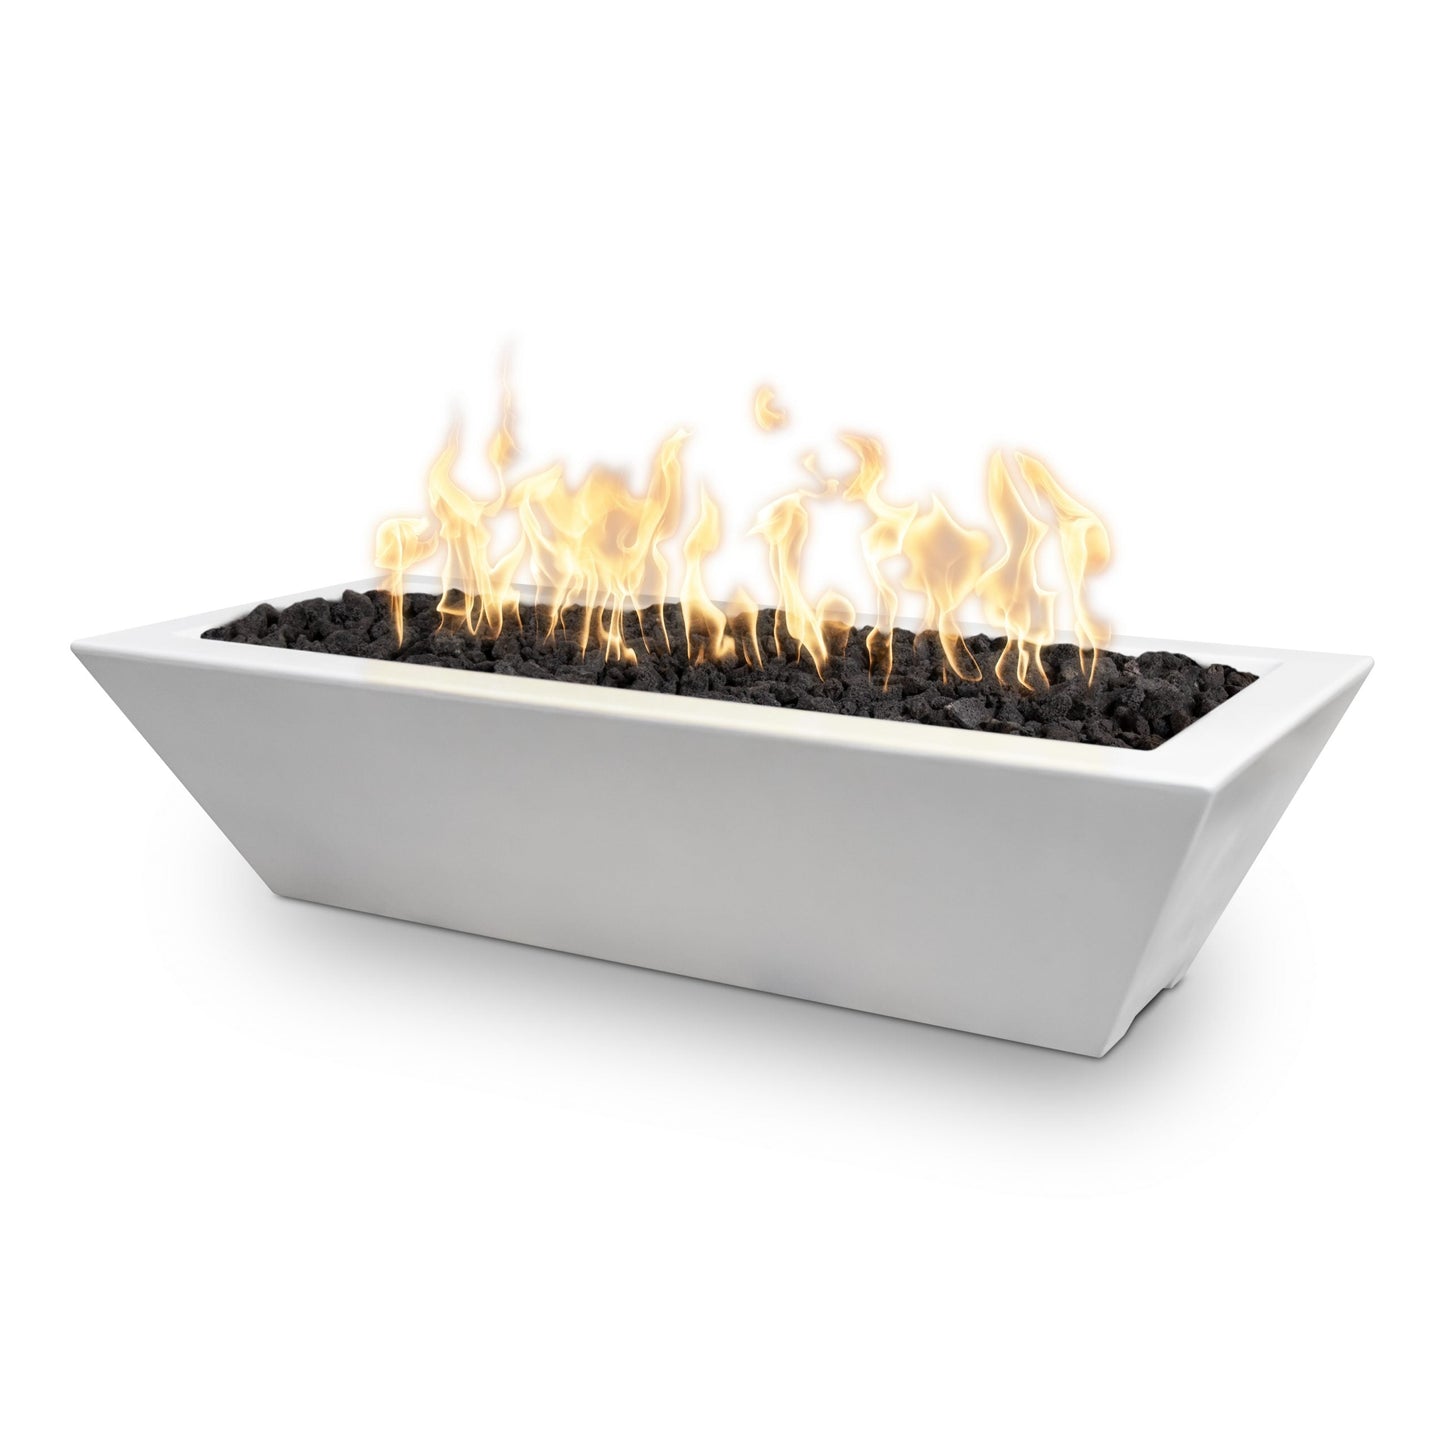 The Outdoor Plus Linear Maya 72" Chocolate GFRC Concrete Liquid Propane Fire Bowl with Match Lit Ignition